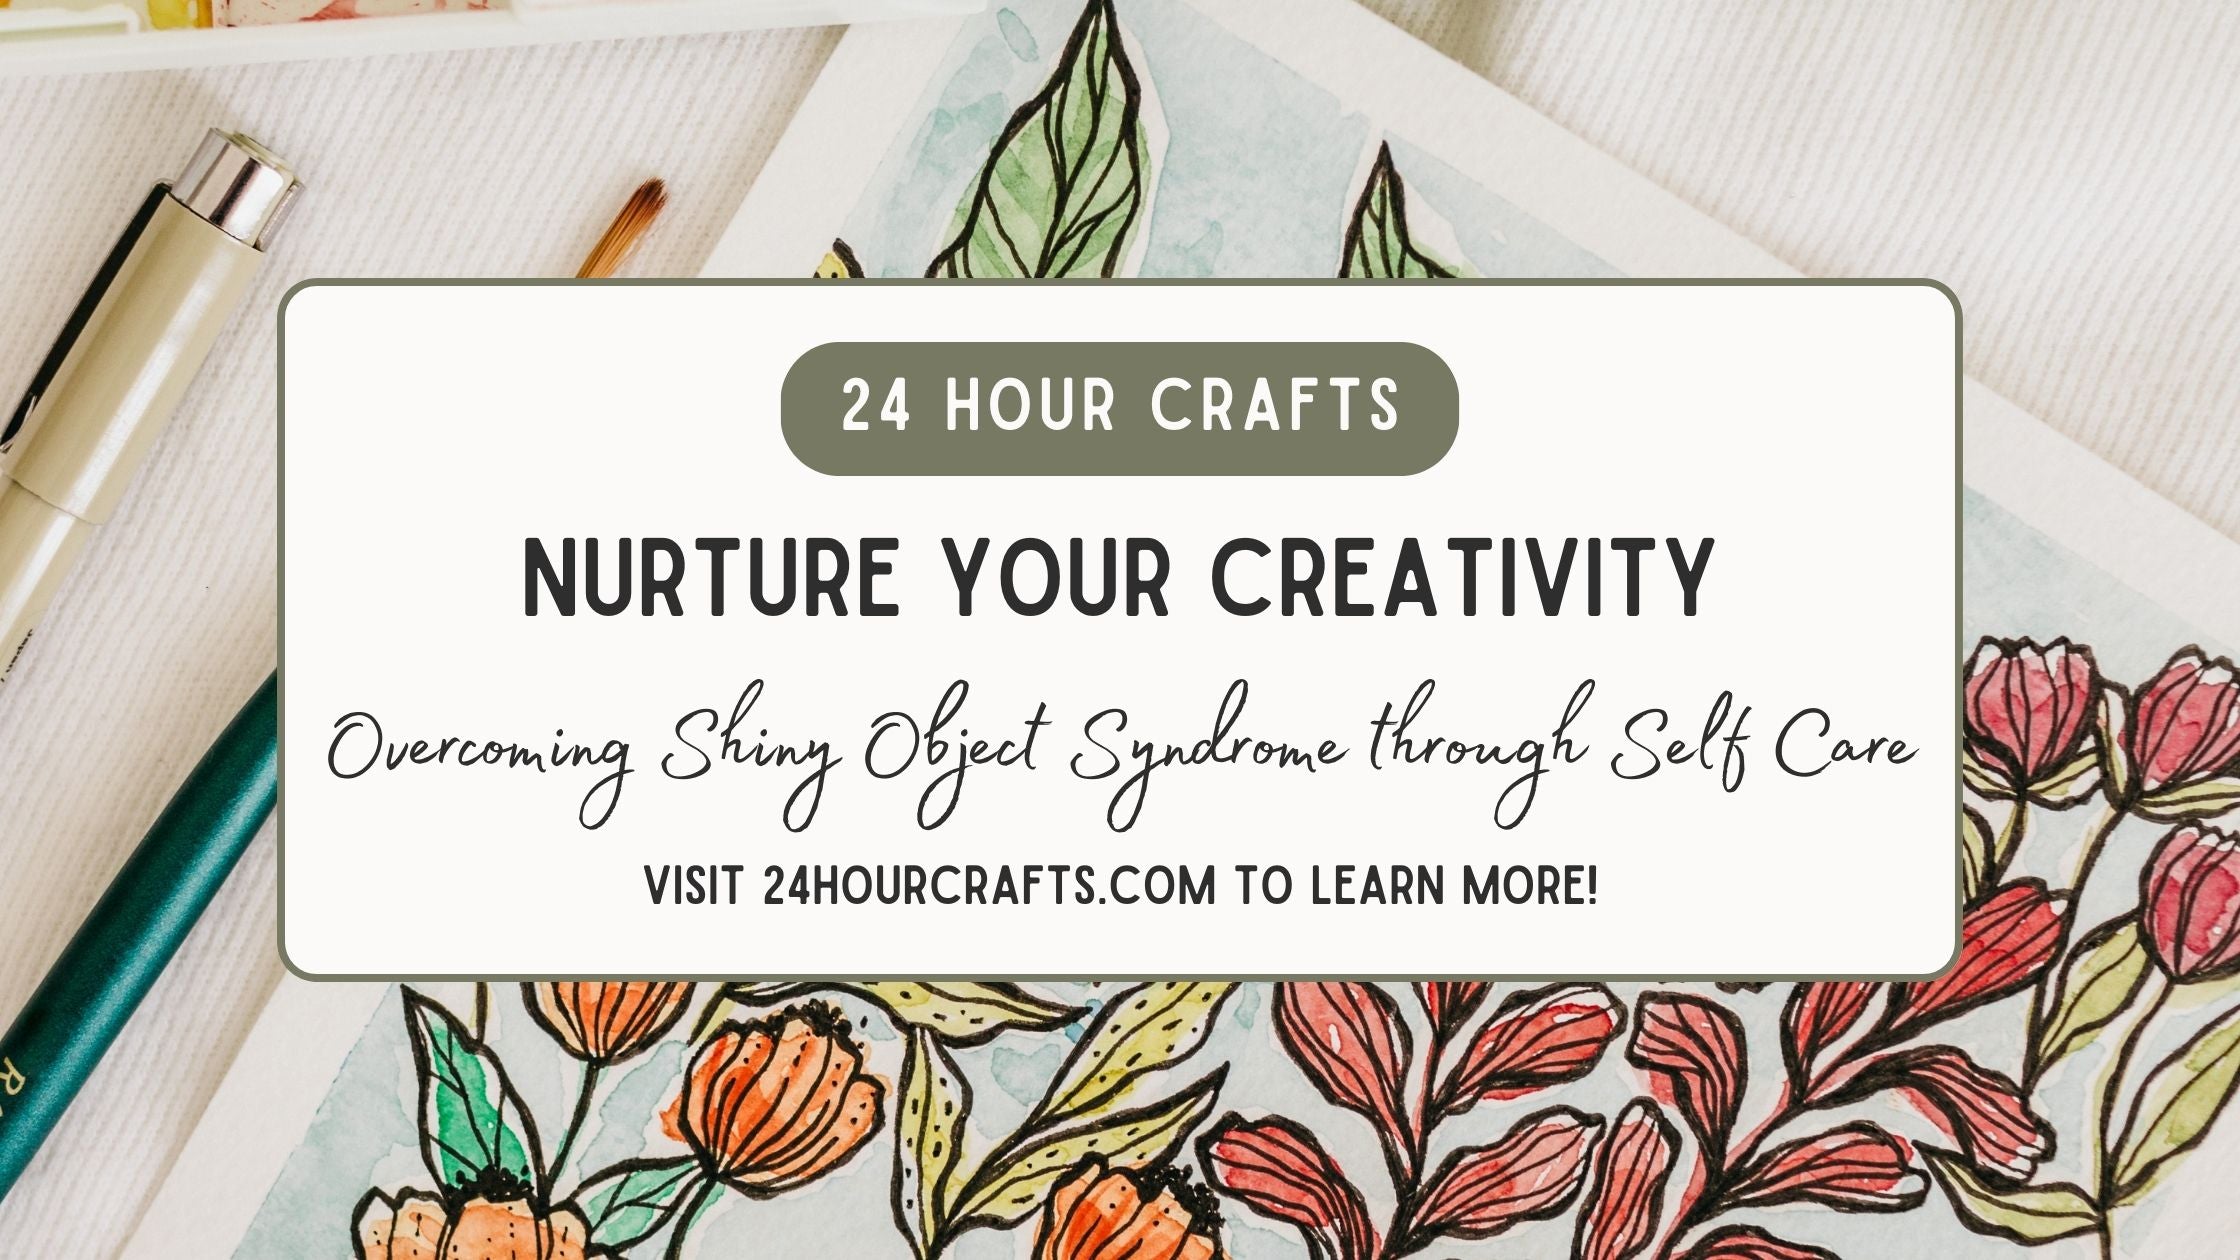 Nurture Your Creativity: Overcoming Shiny Object Syndrome through Self Care